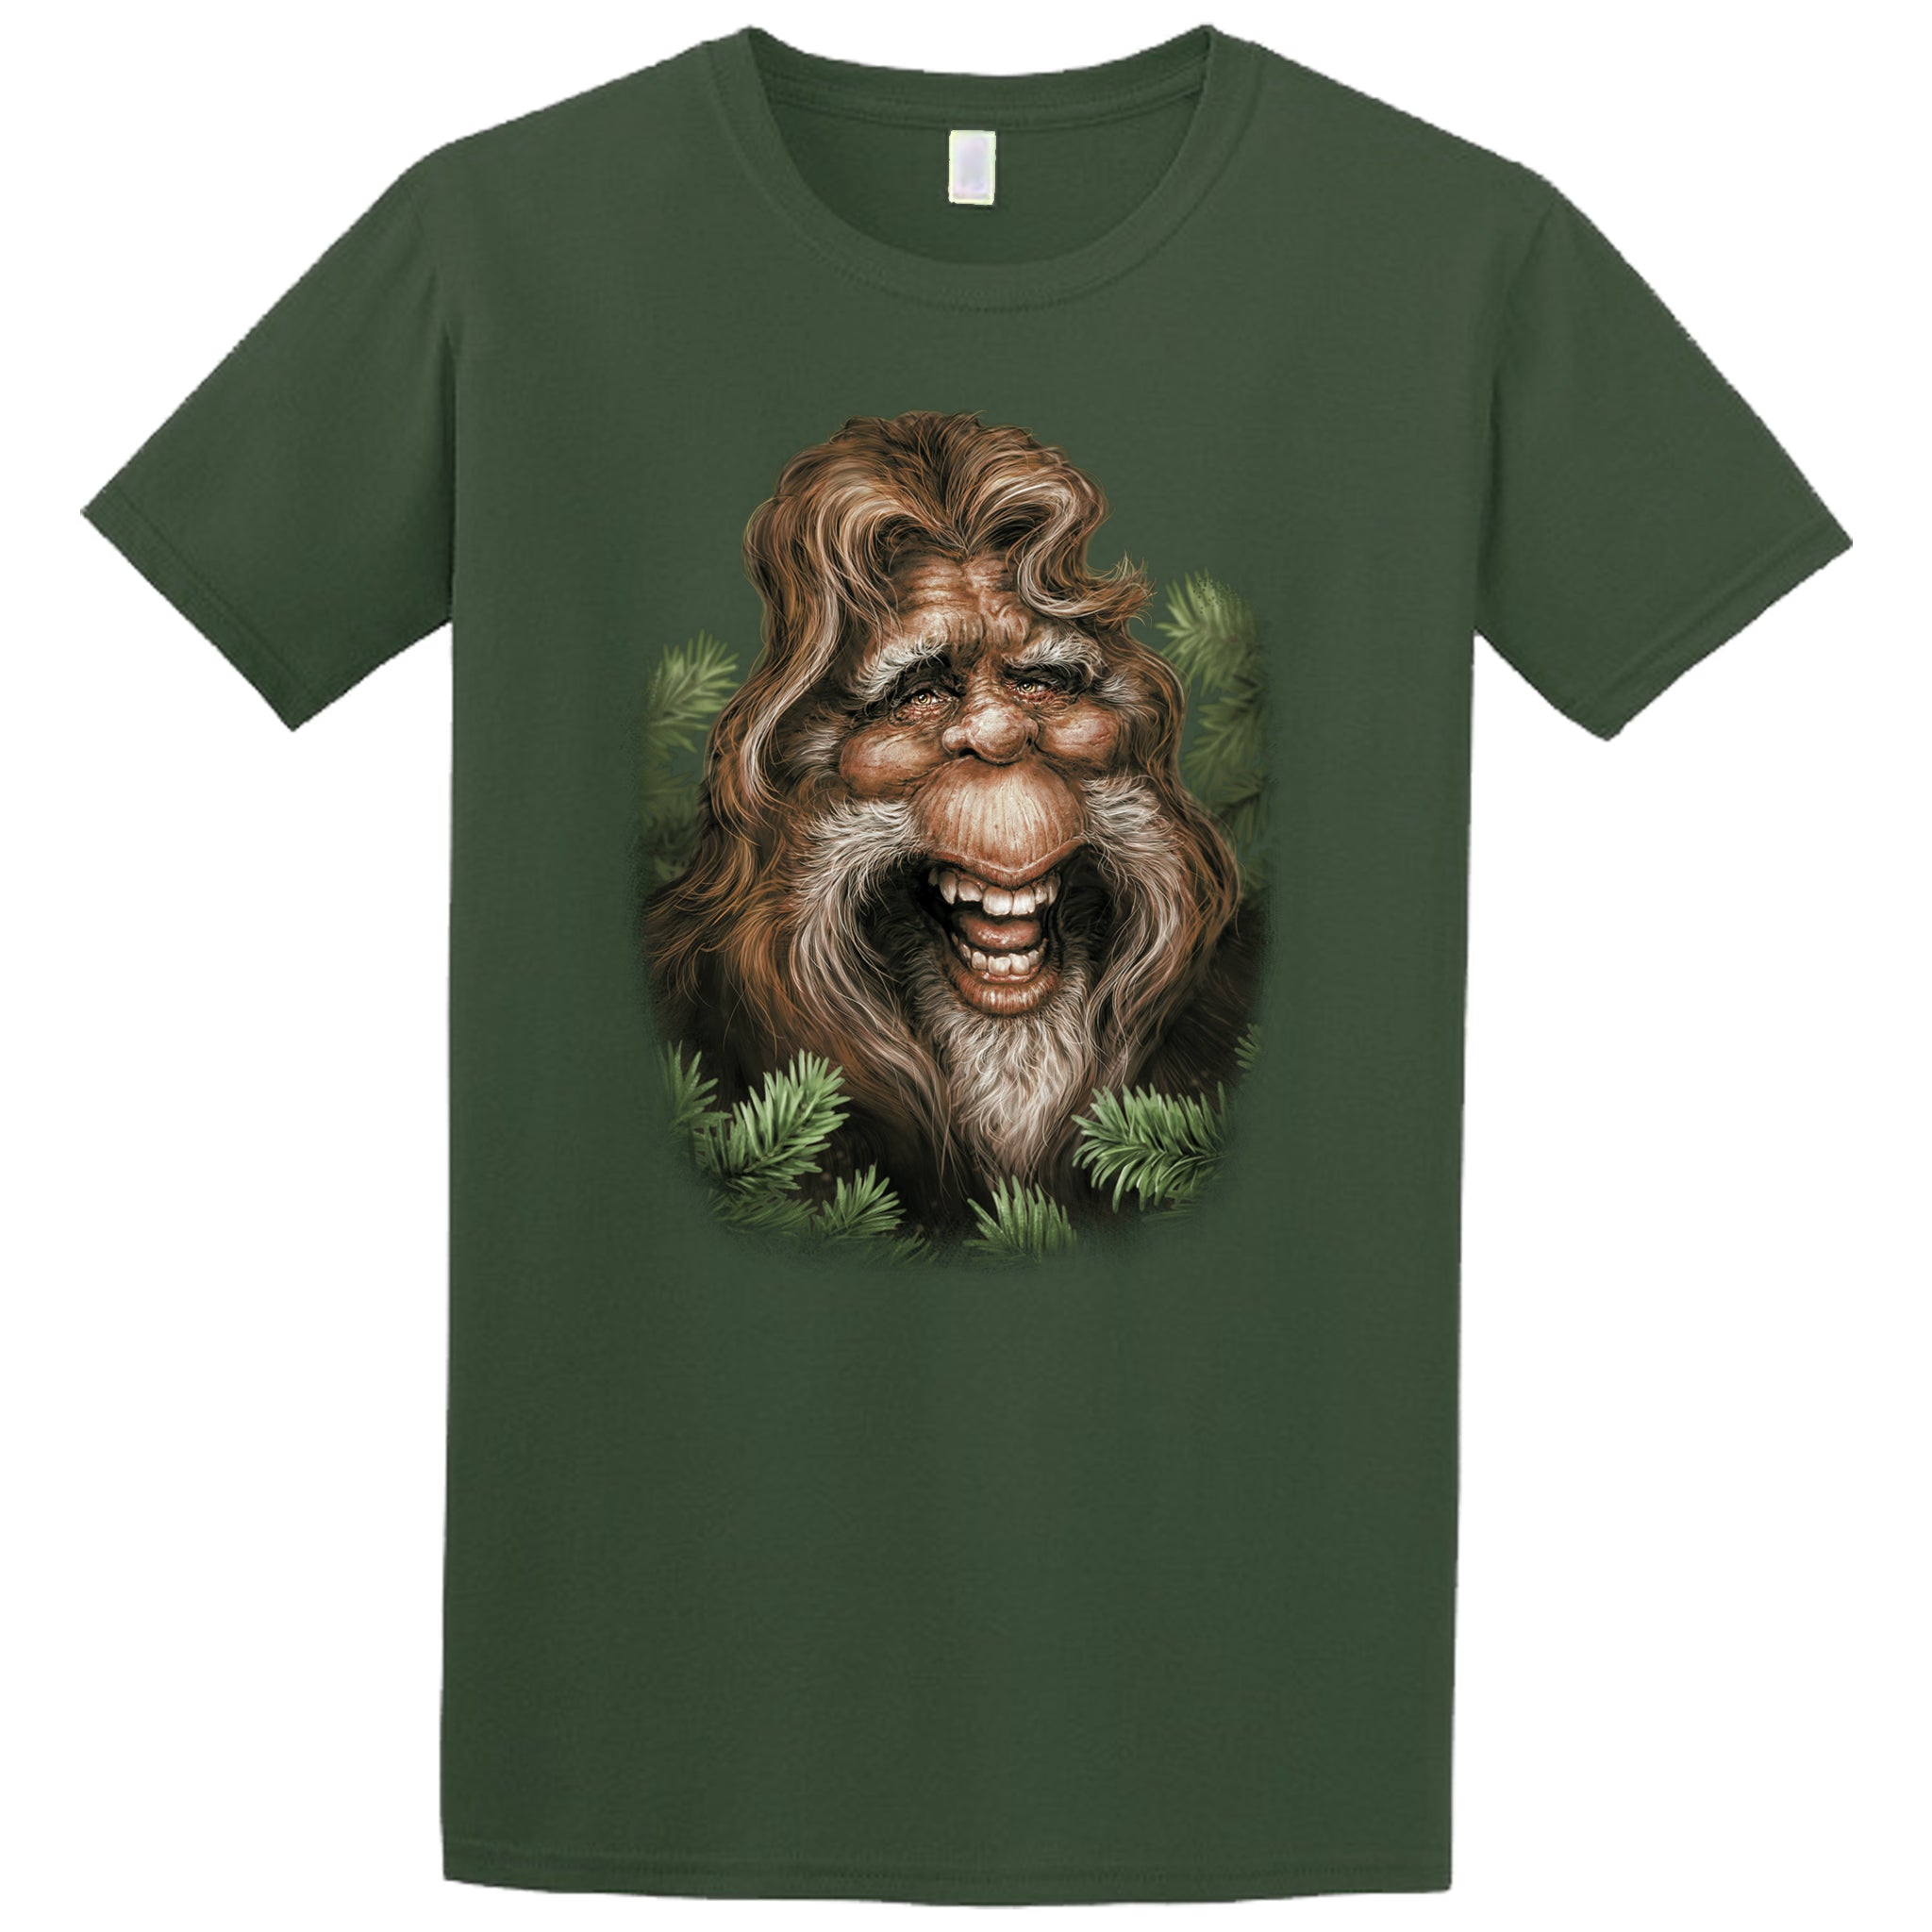 Bigfoot Bob T-shirt- military green t-shirt printed with image of friendly Sasquatch by Canadian artist Patrick LaMontagne